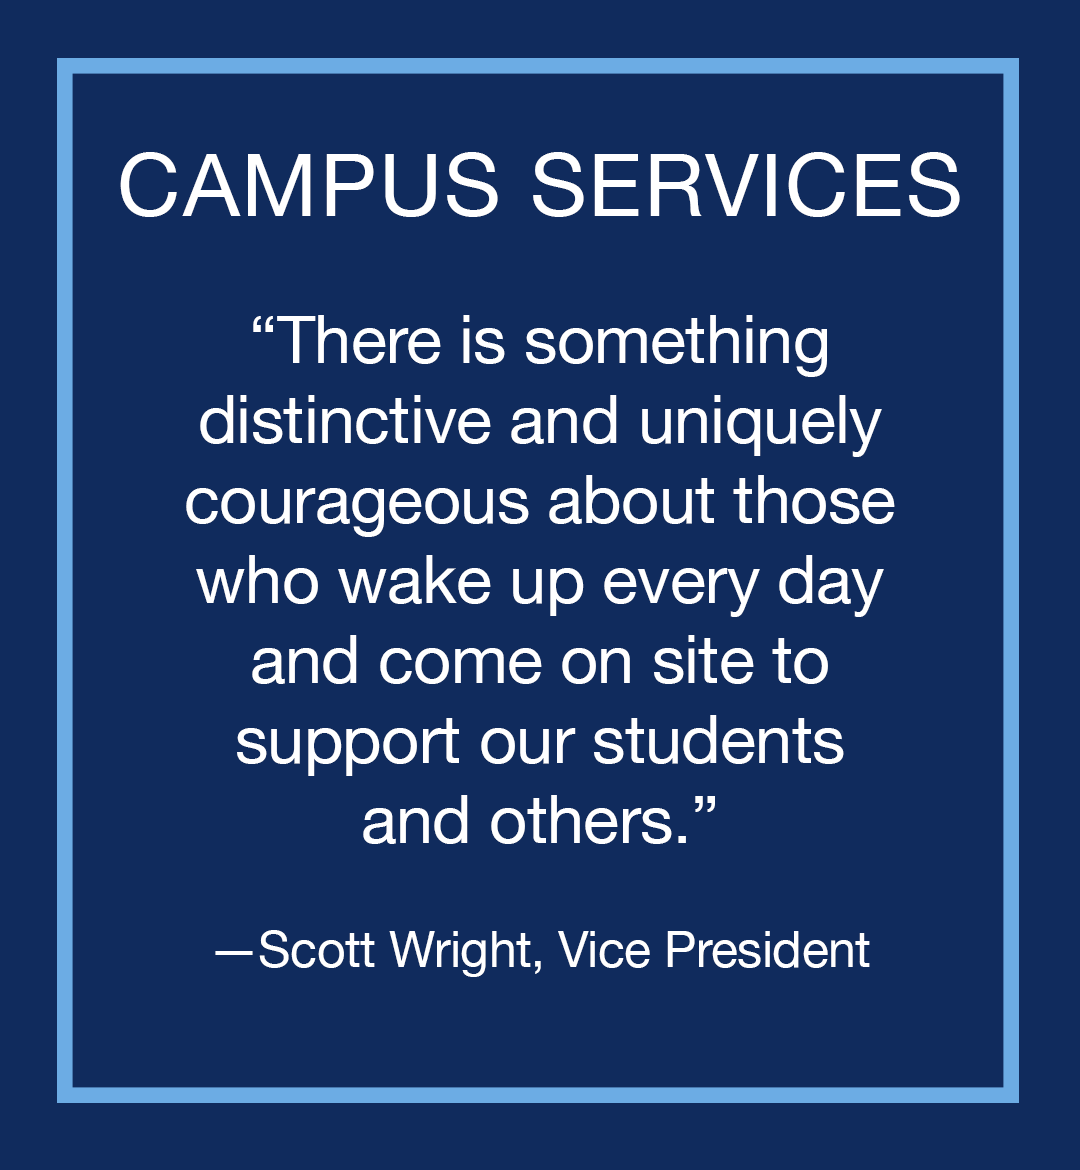 Image with text: Campus Services, "There is something distinctive and uniquely courageous about those who wake up everyday and come on site to support our students and others," Scott Wright, Vice Presient.